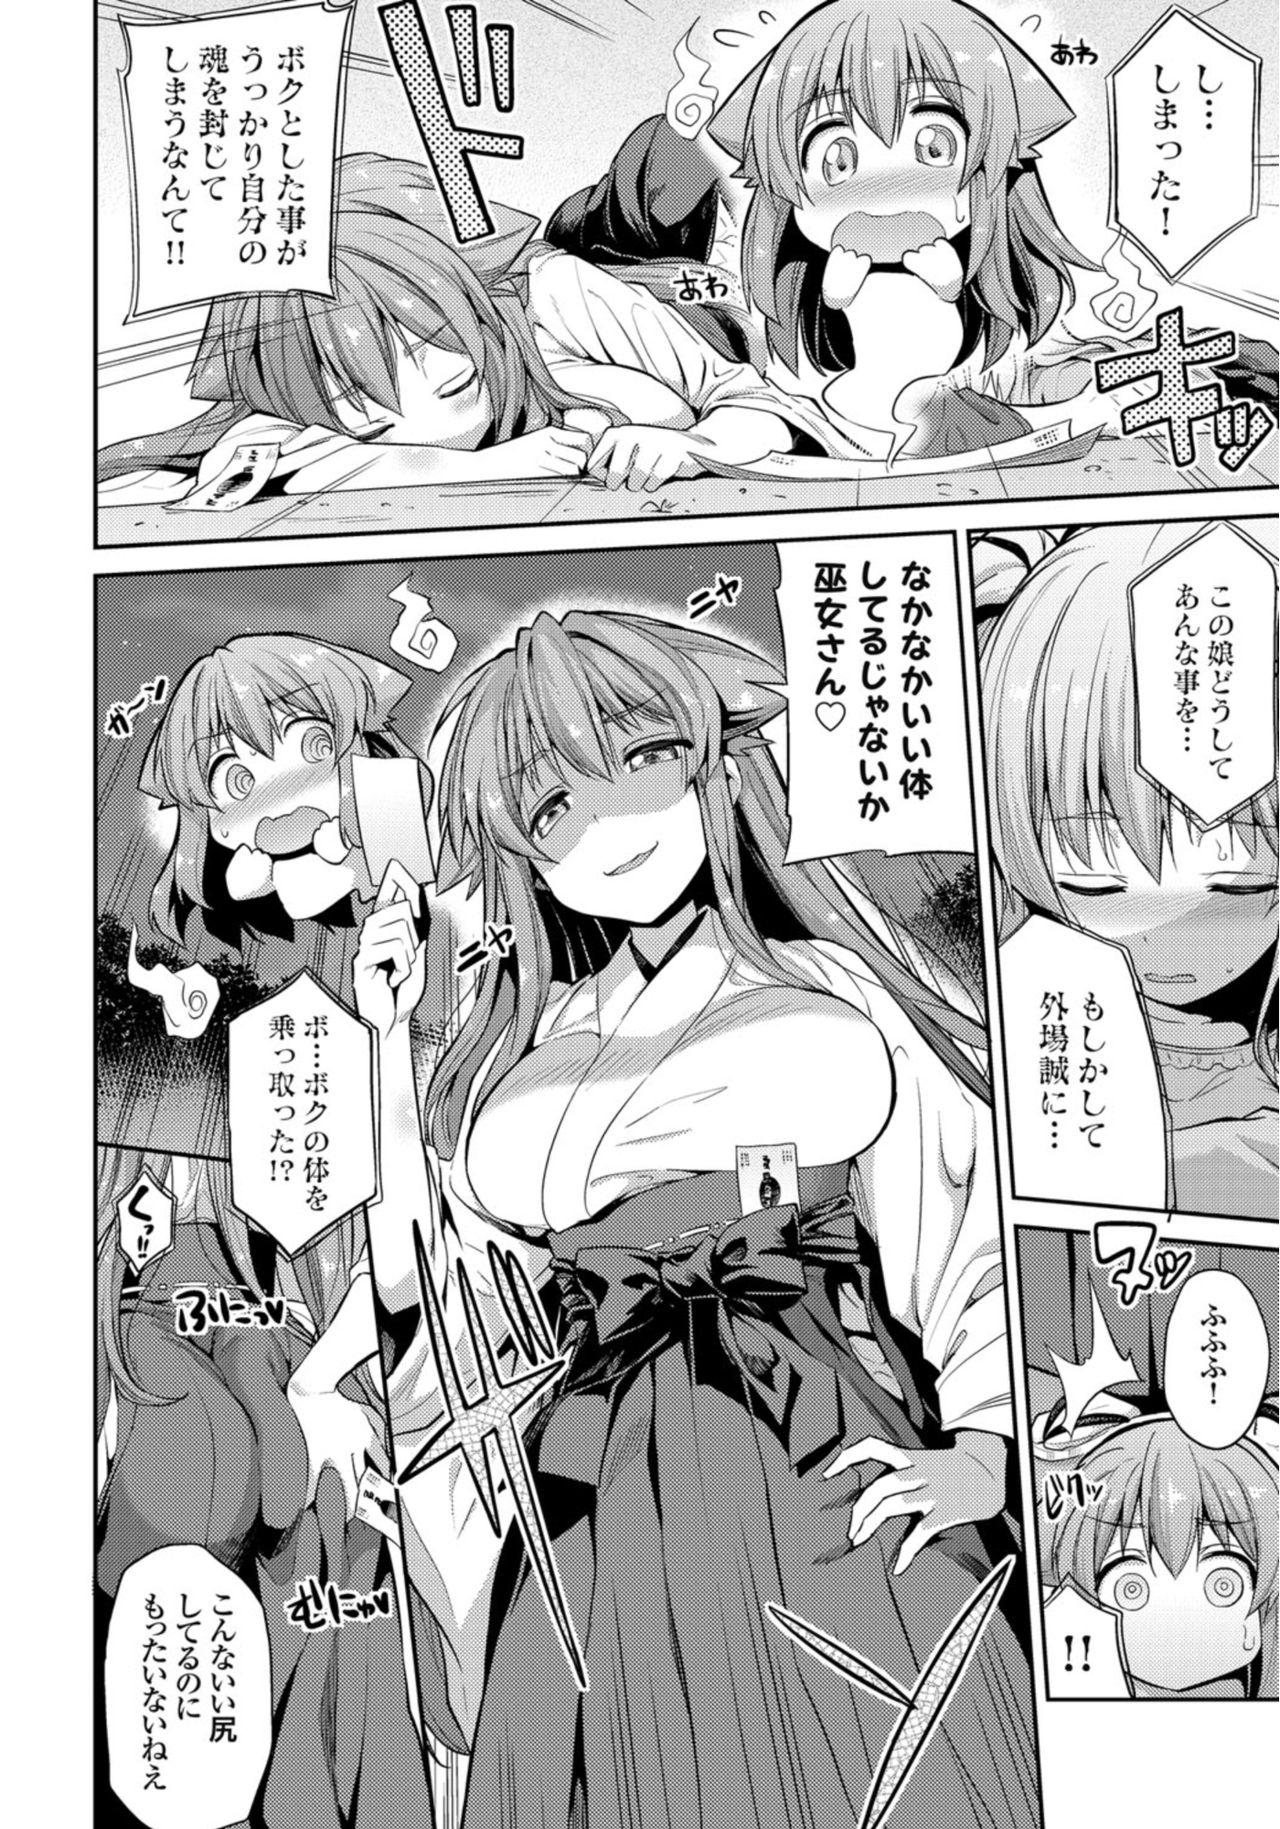 Strip 憑りつき×乗っ取り×孕ませろ！肆憑き 〜ドロリ濃厚！退魔巫女種付けレイプ！〜 Cameltoe - Page 4